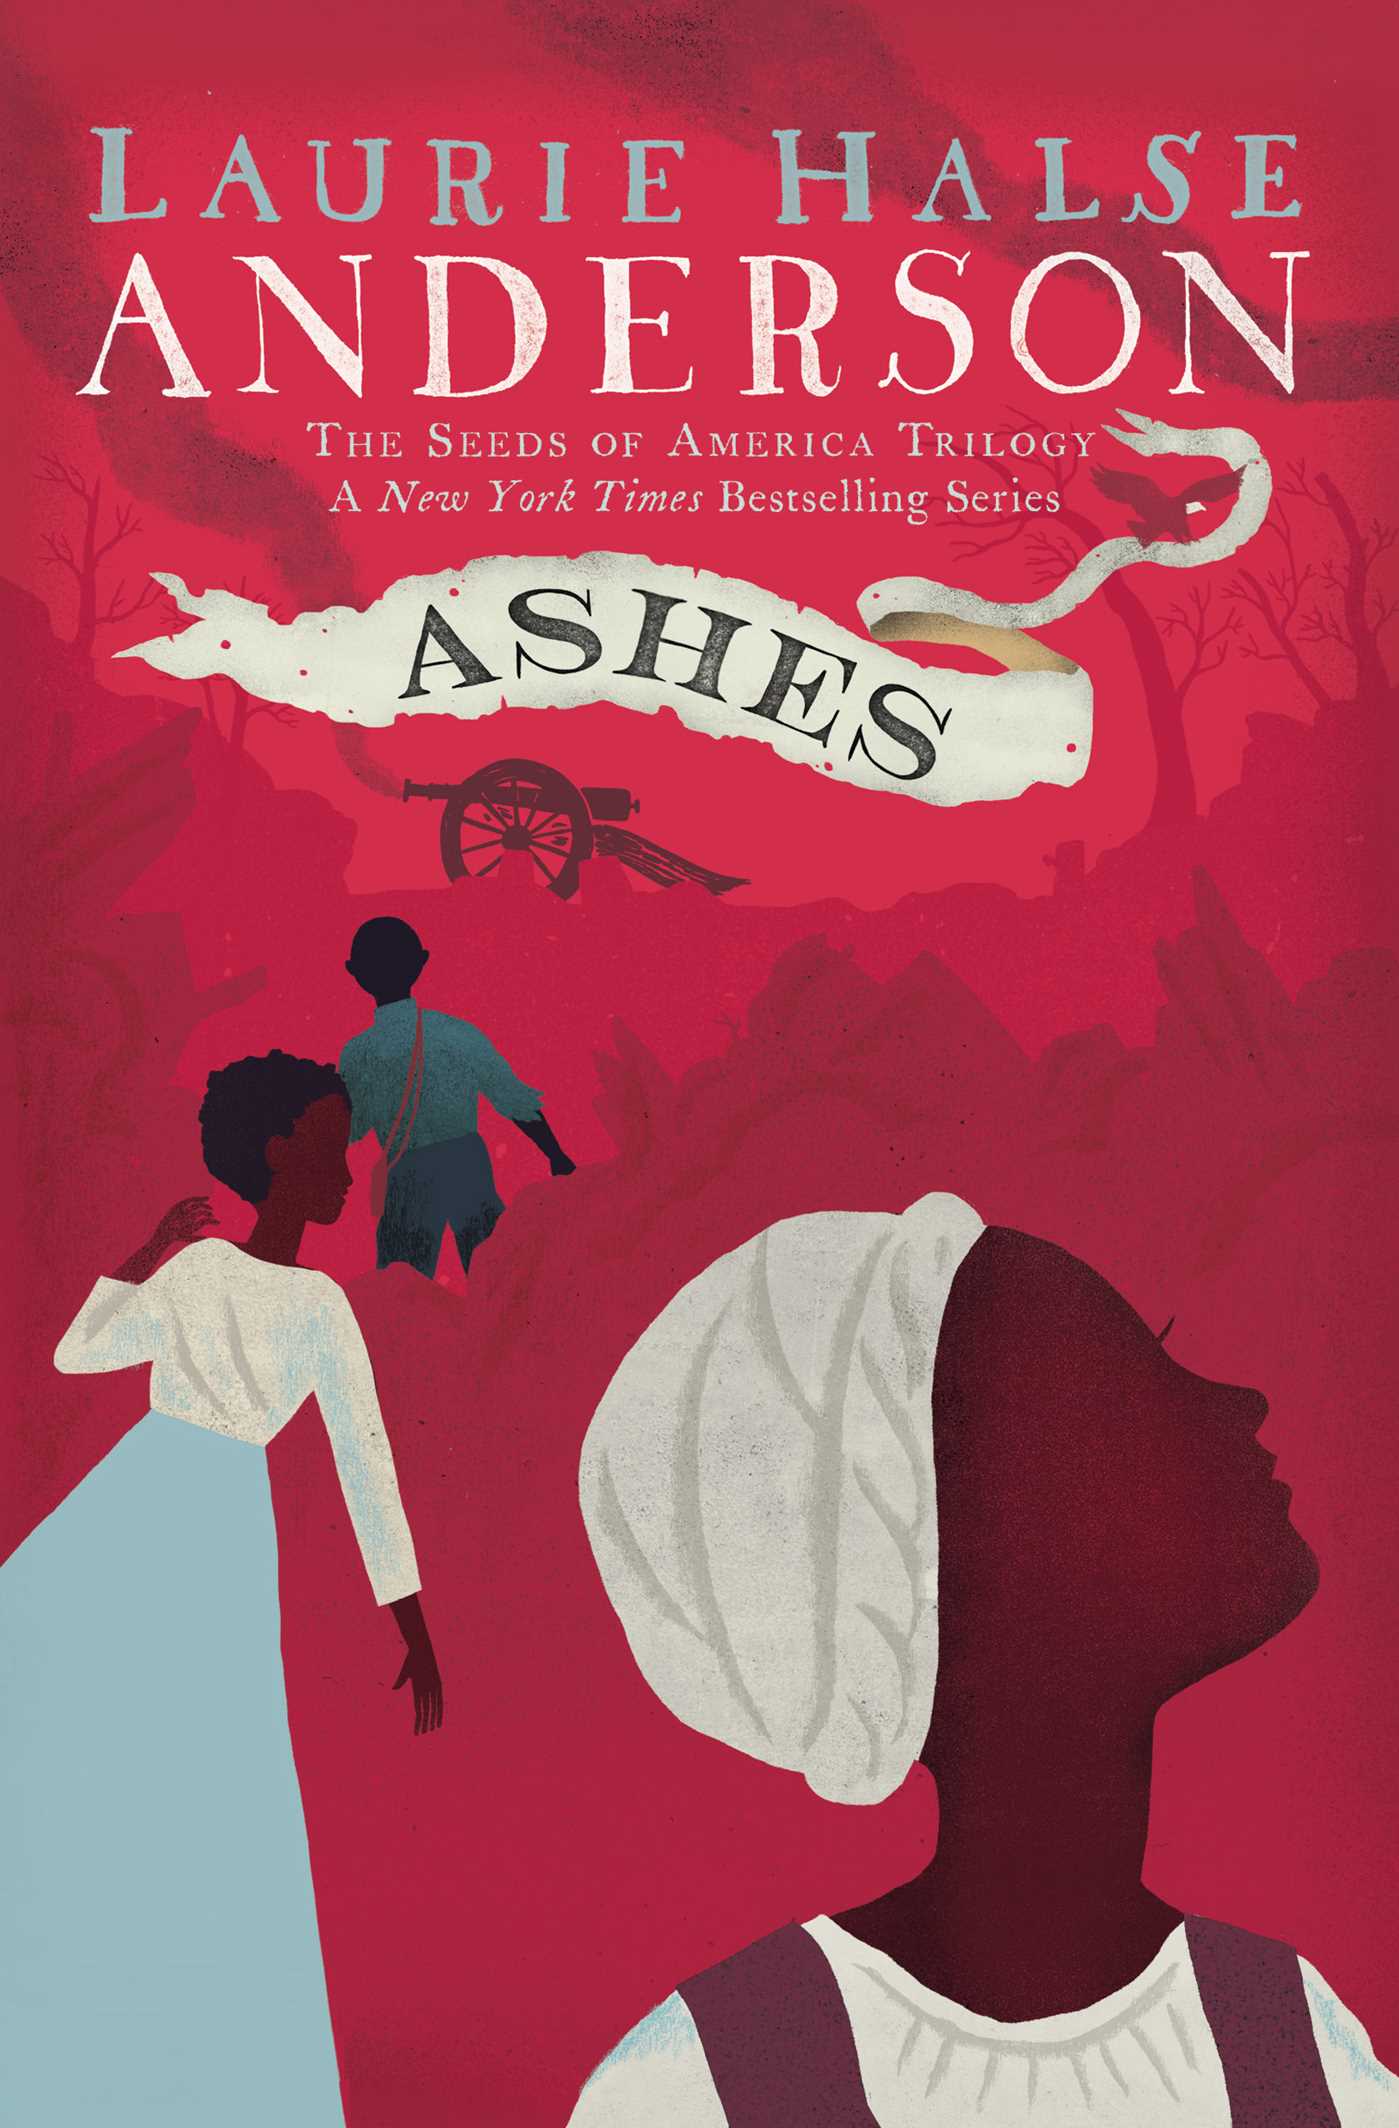 Ashes: The Seeds of America Trilogy (Laurie Halse Anderson; Atheneum/Caitlyn Dlouhy Books)